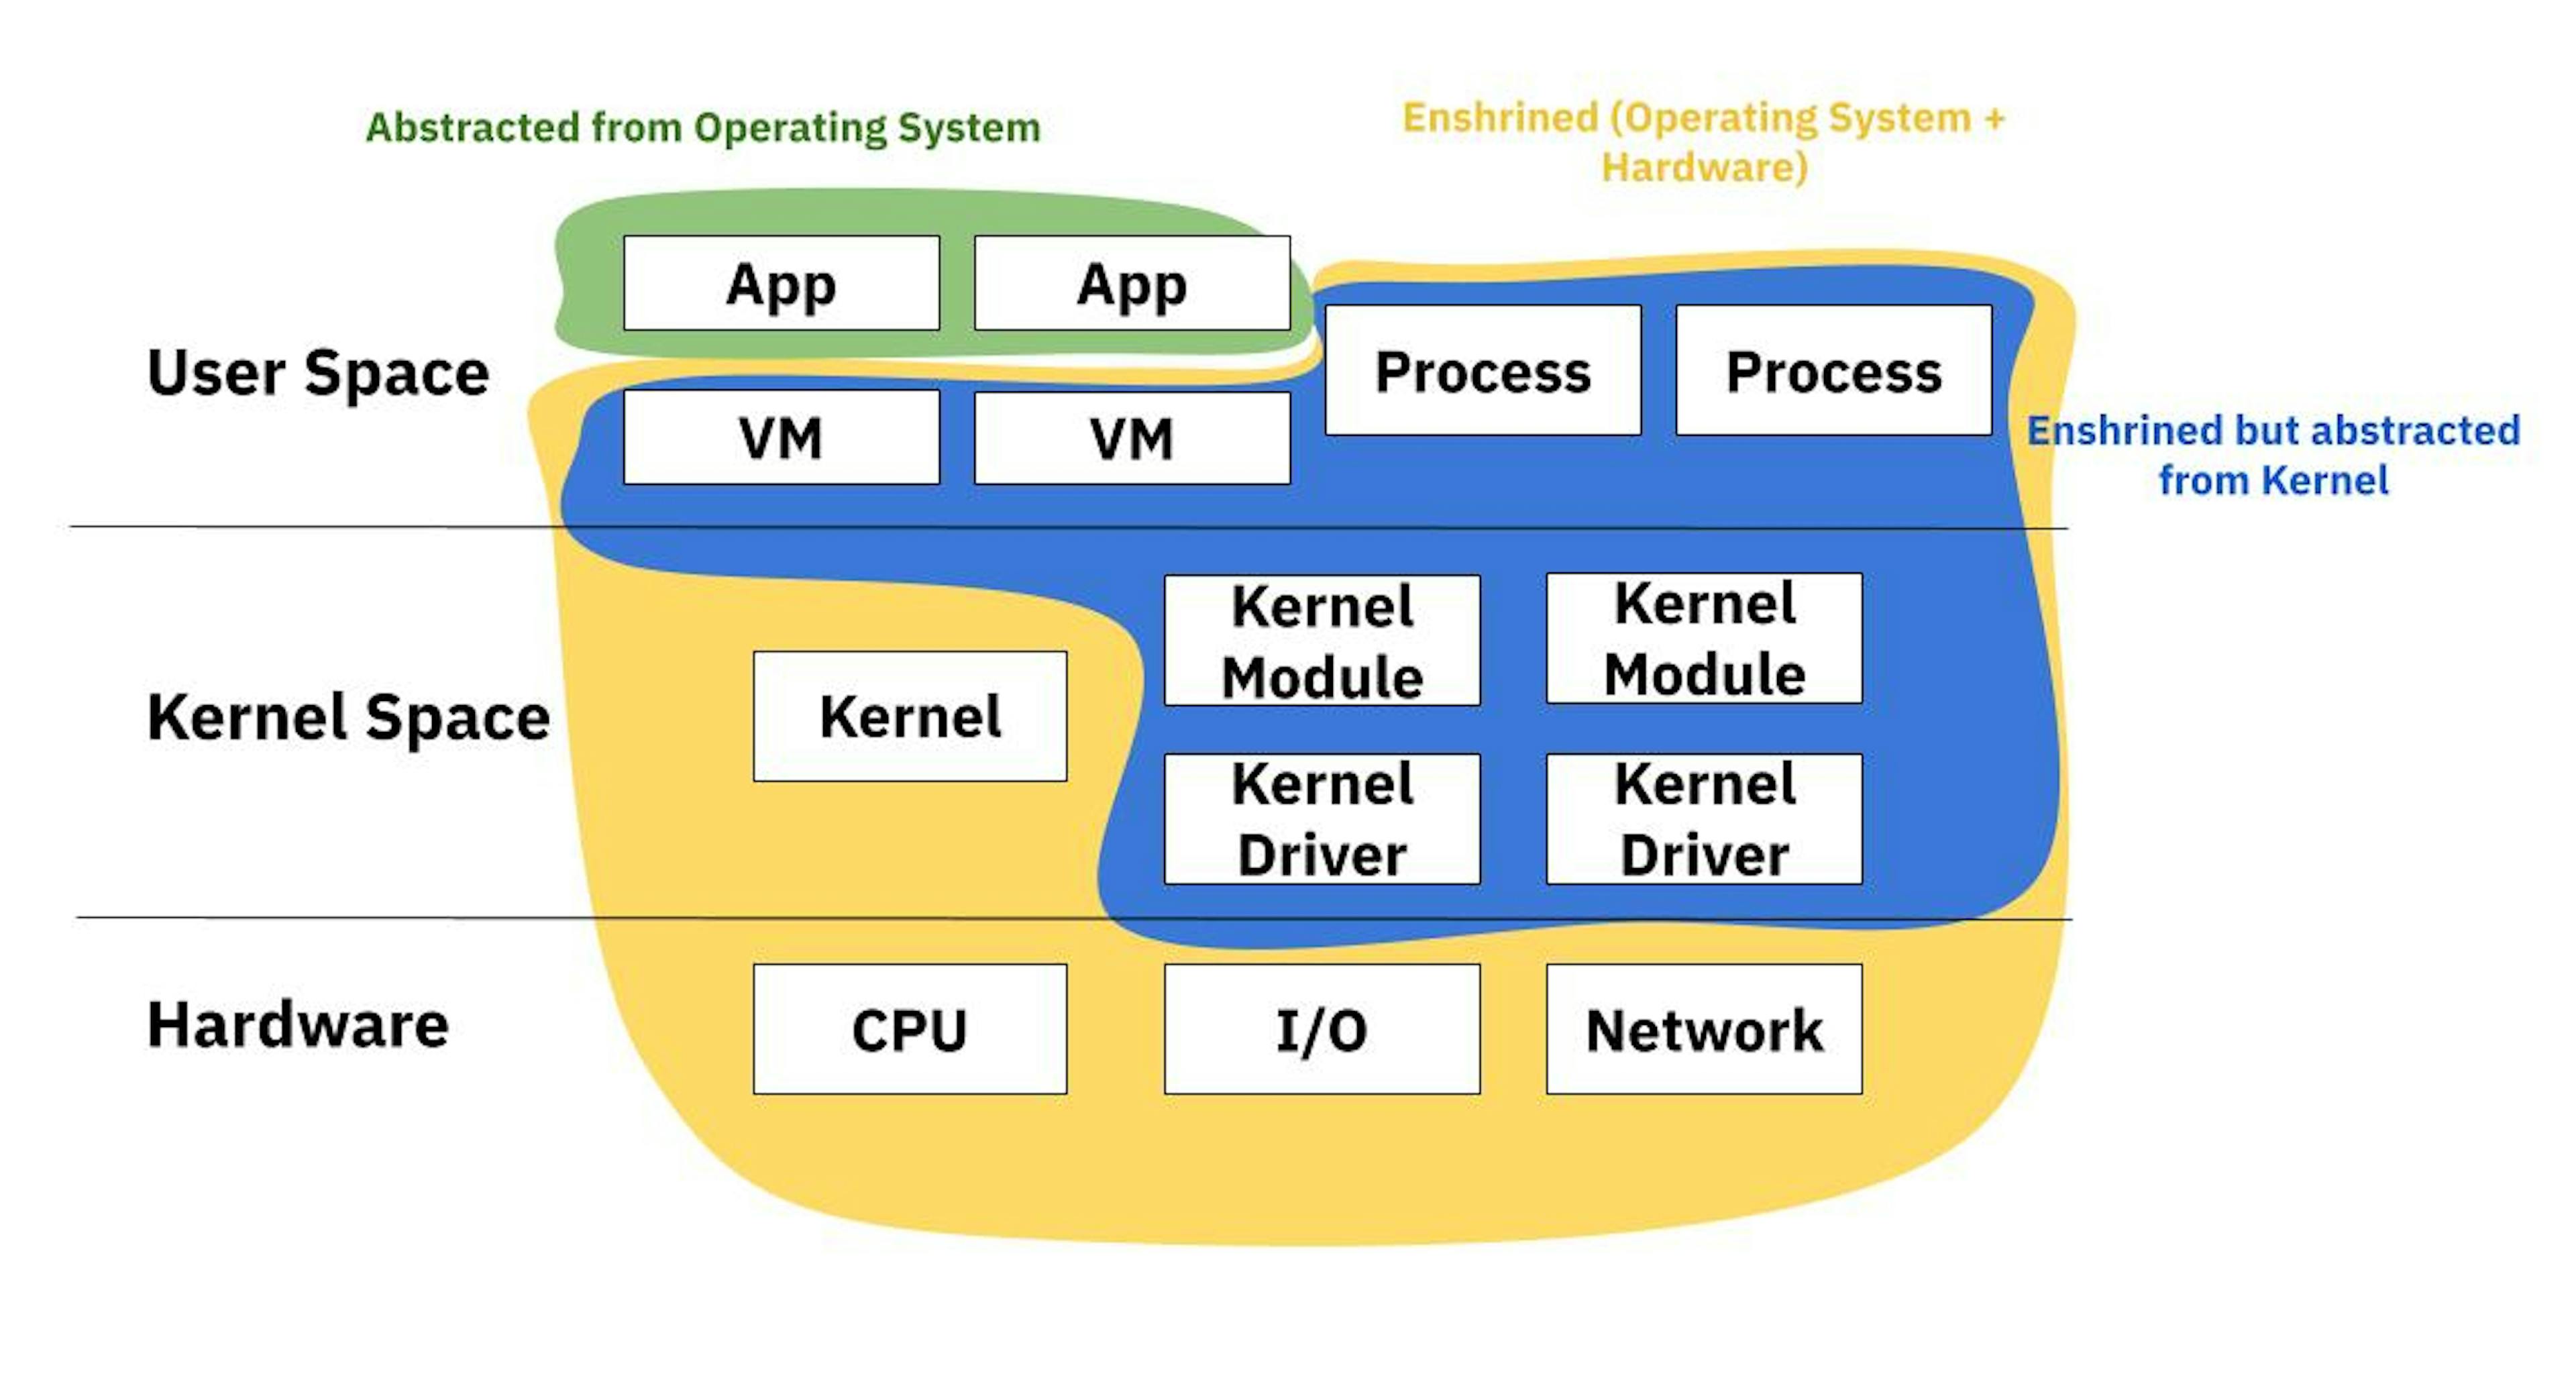 Enshrinement in the Operating System Model